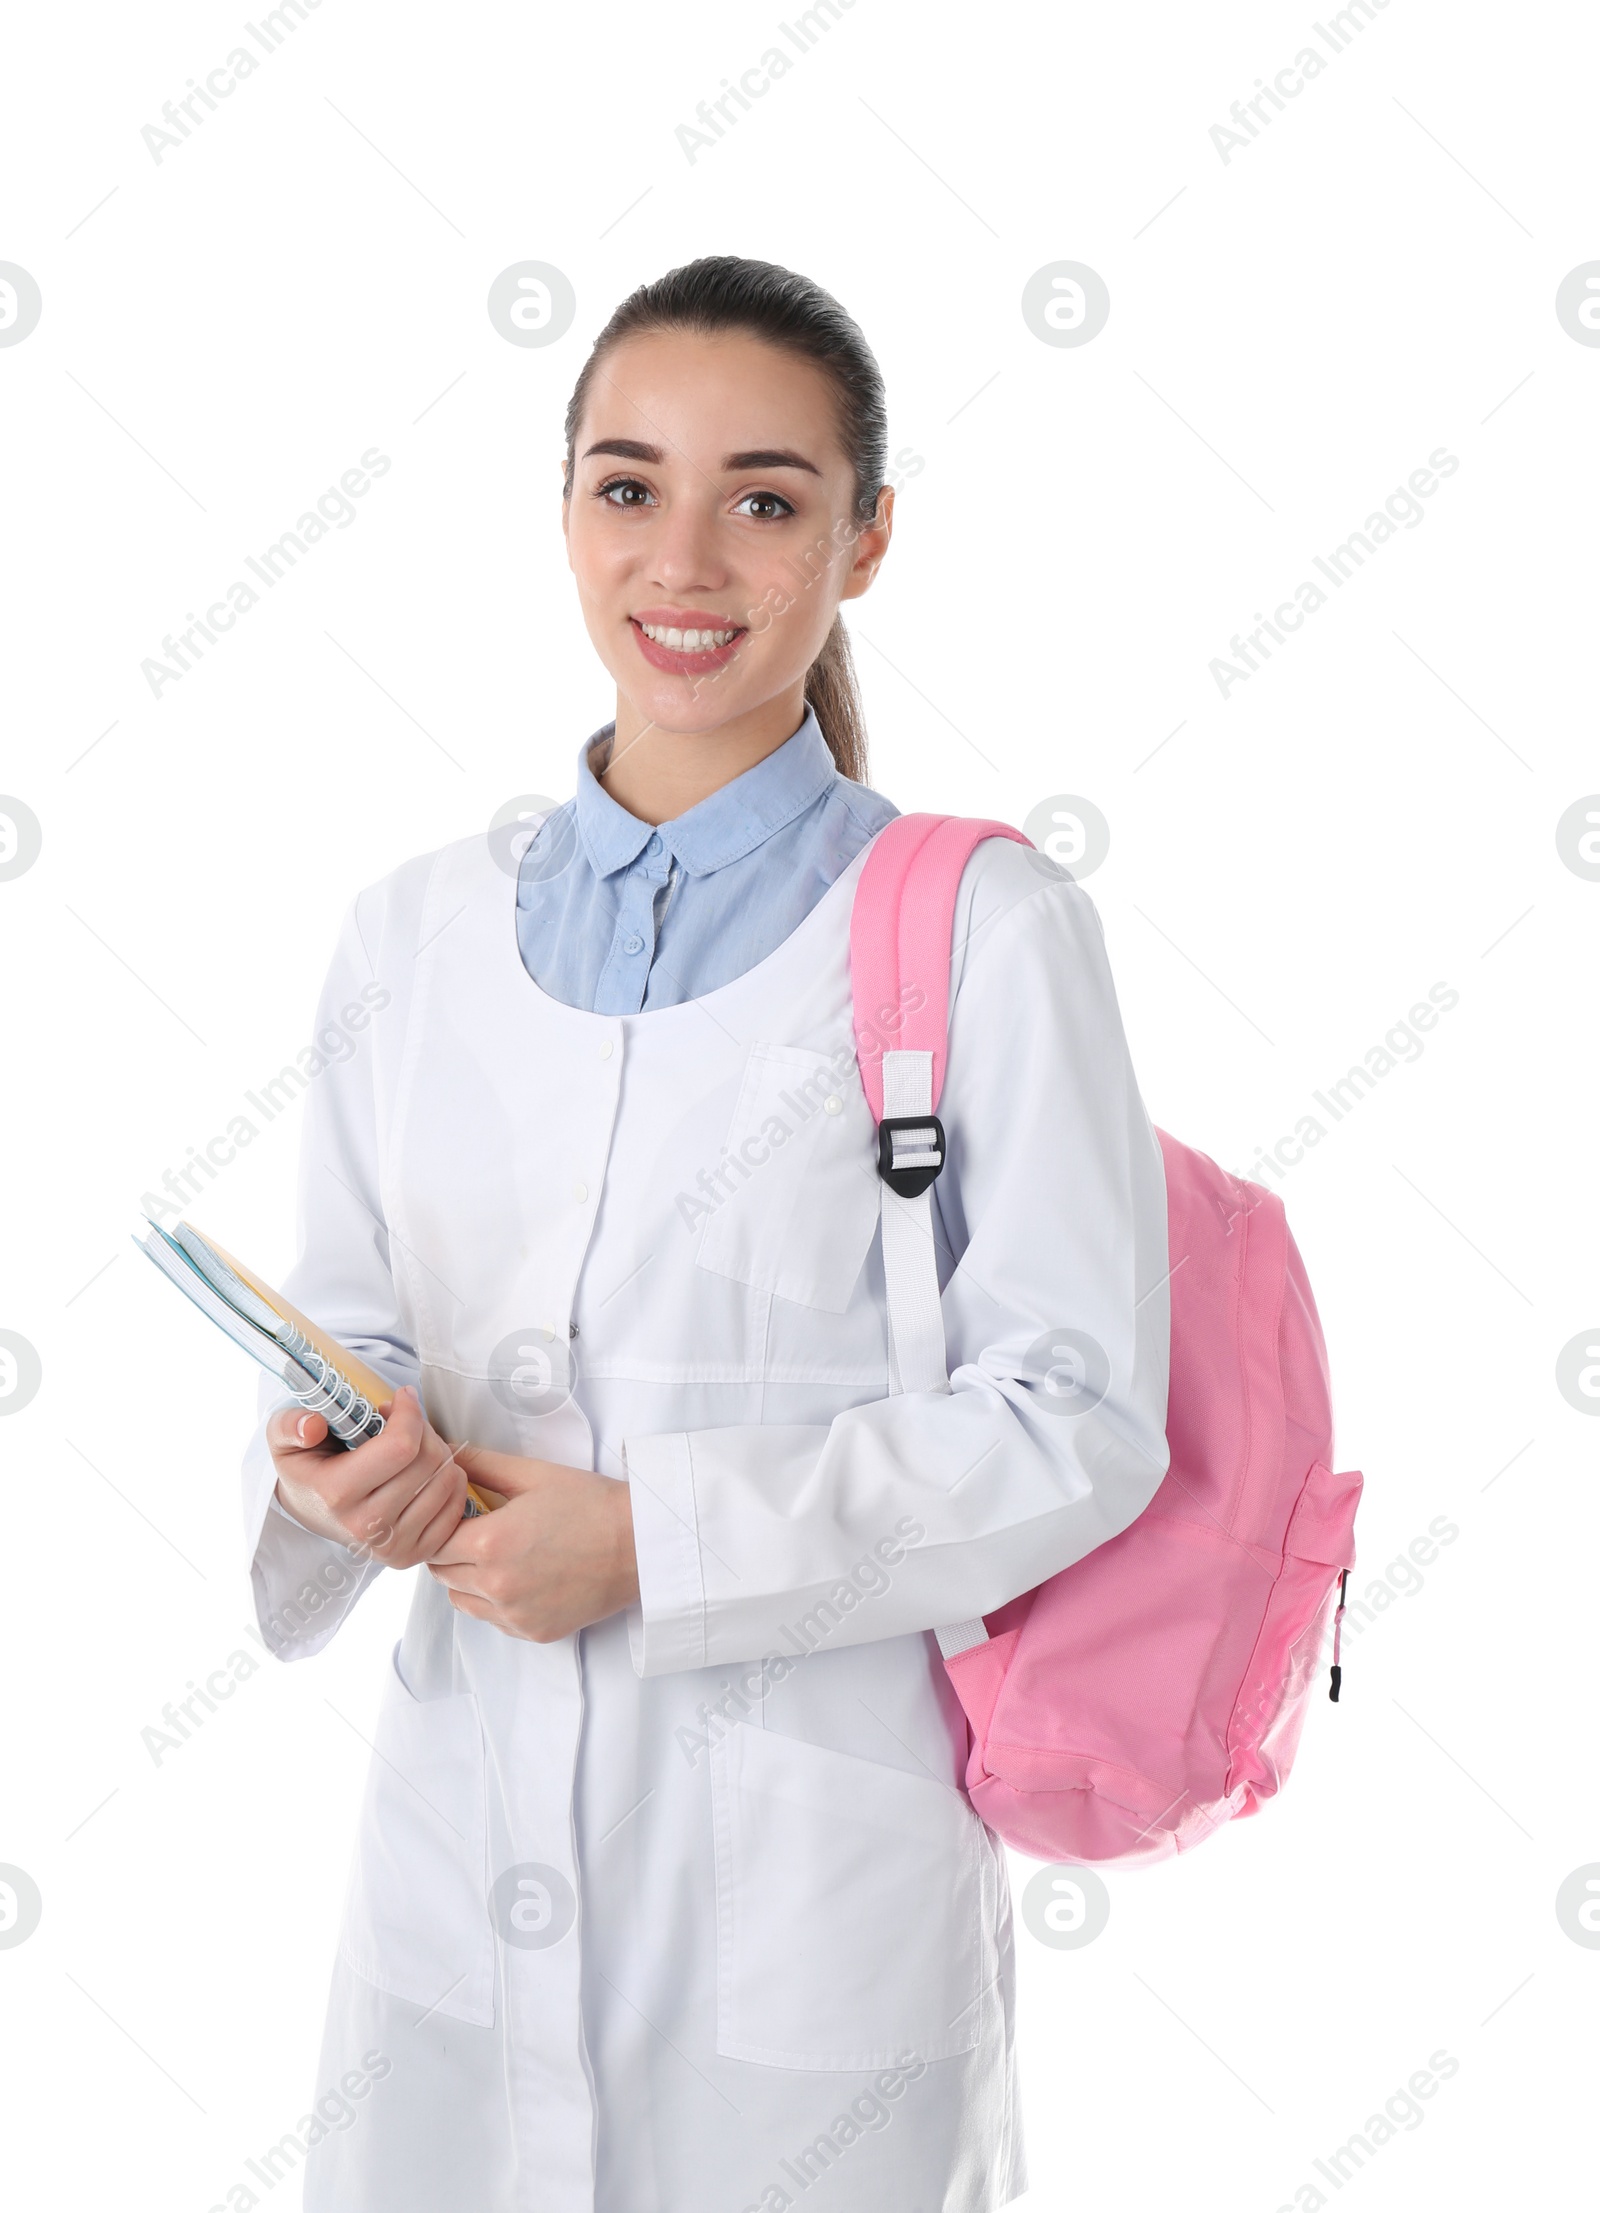 Photo of Young medical student with notebooks and backpack on white background